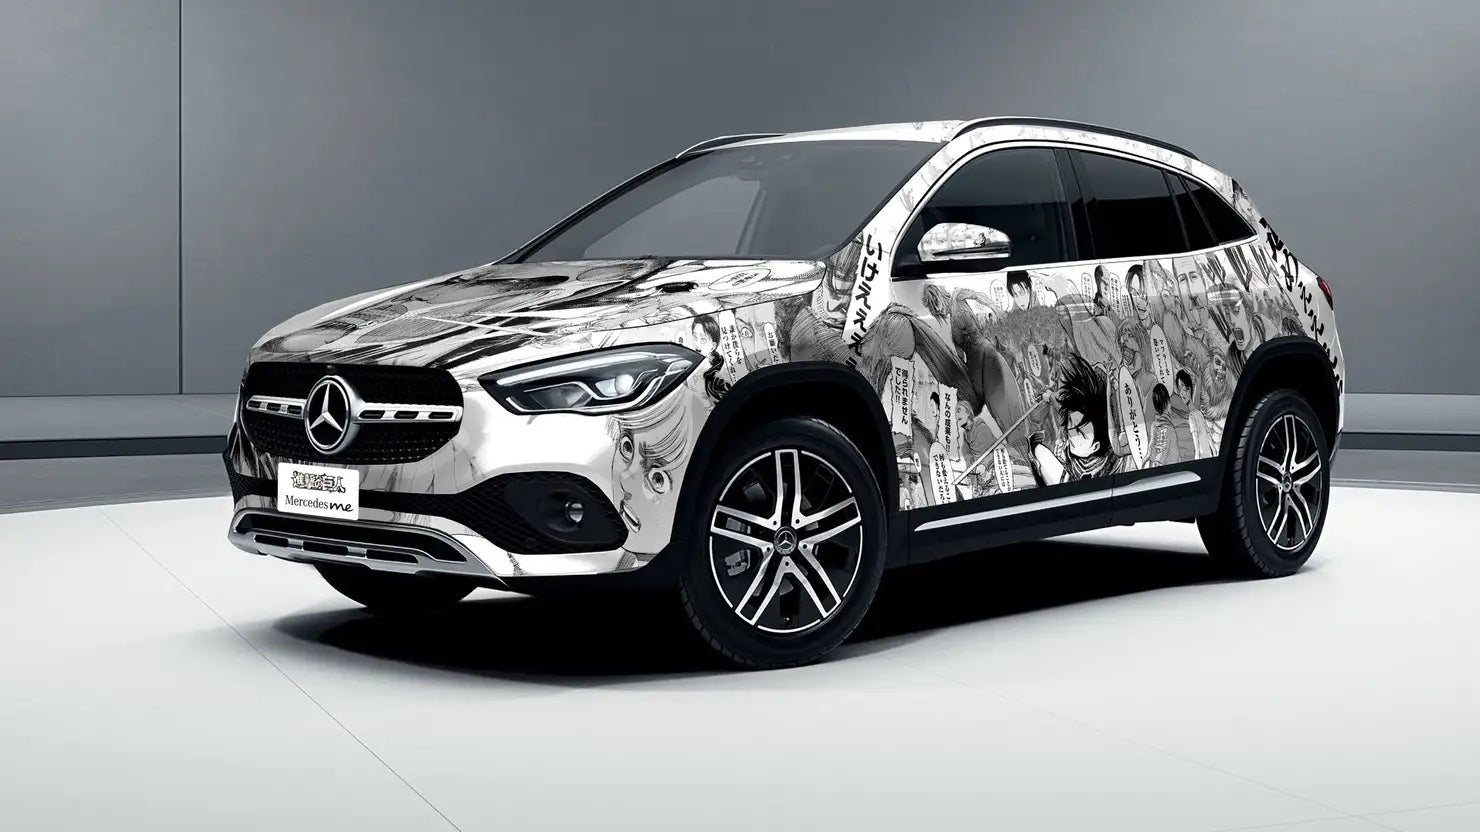 Attack on Titan and Mercedes Benz Collaborate on Car Wrapping